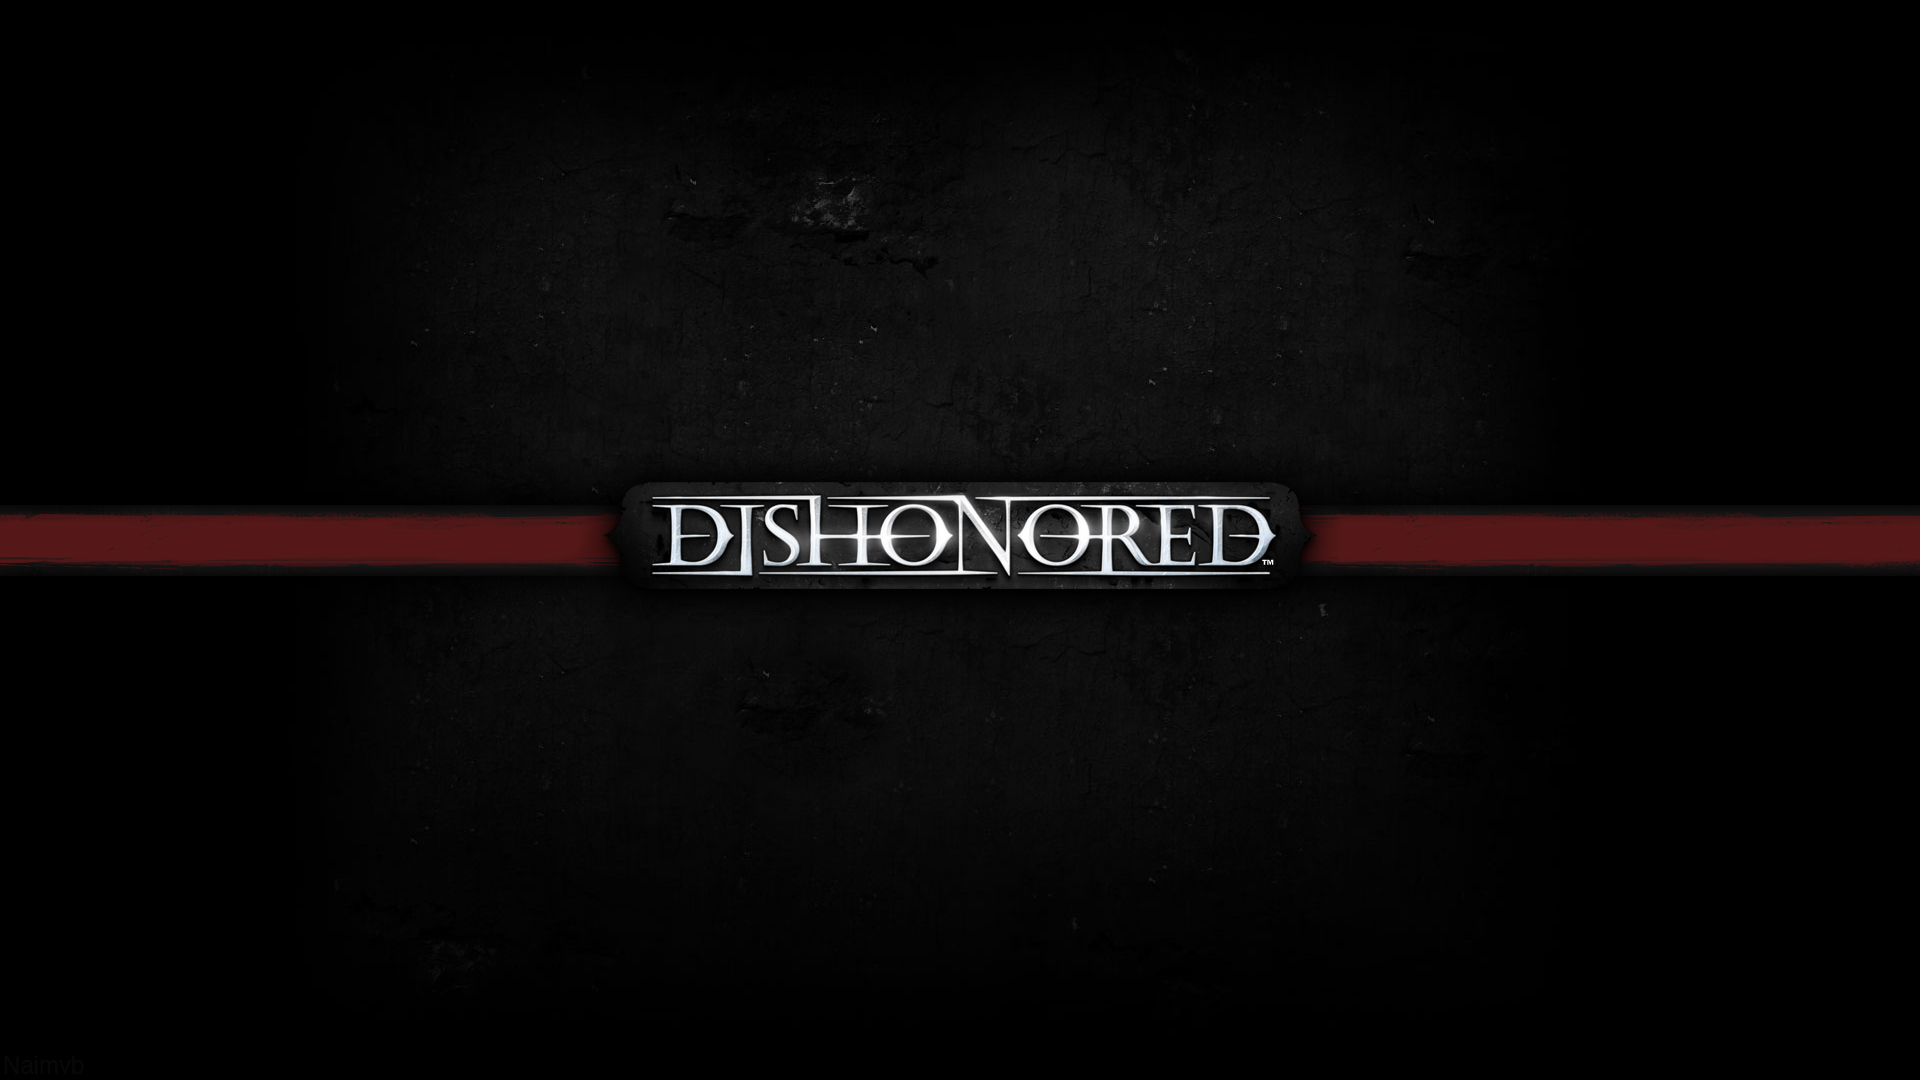 Dishonored Abstract Game Logo Background Wallpaper